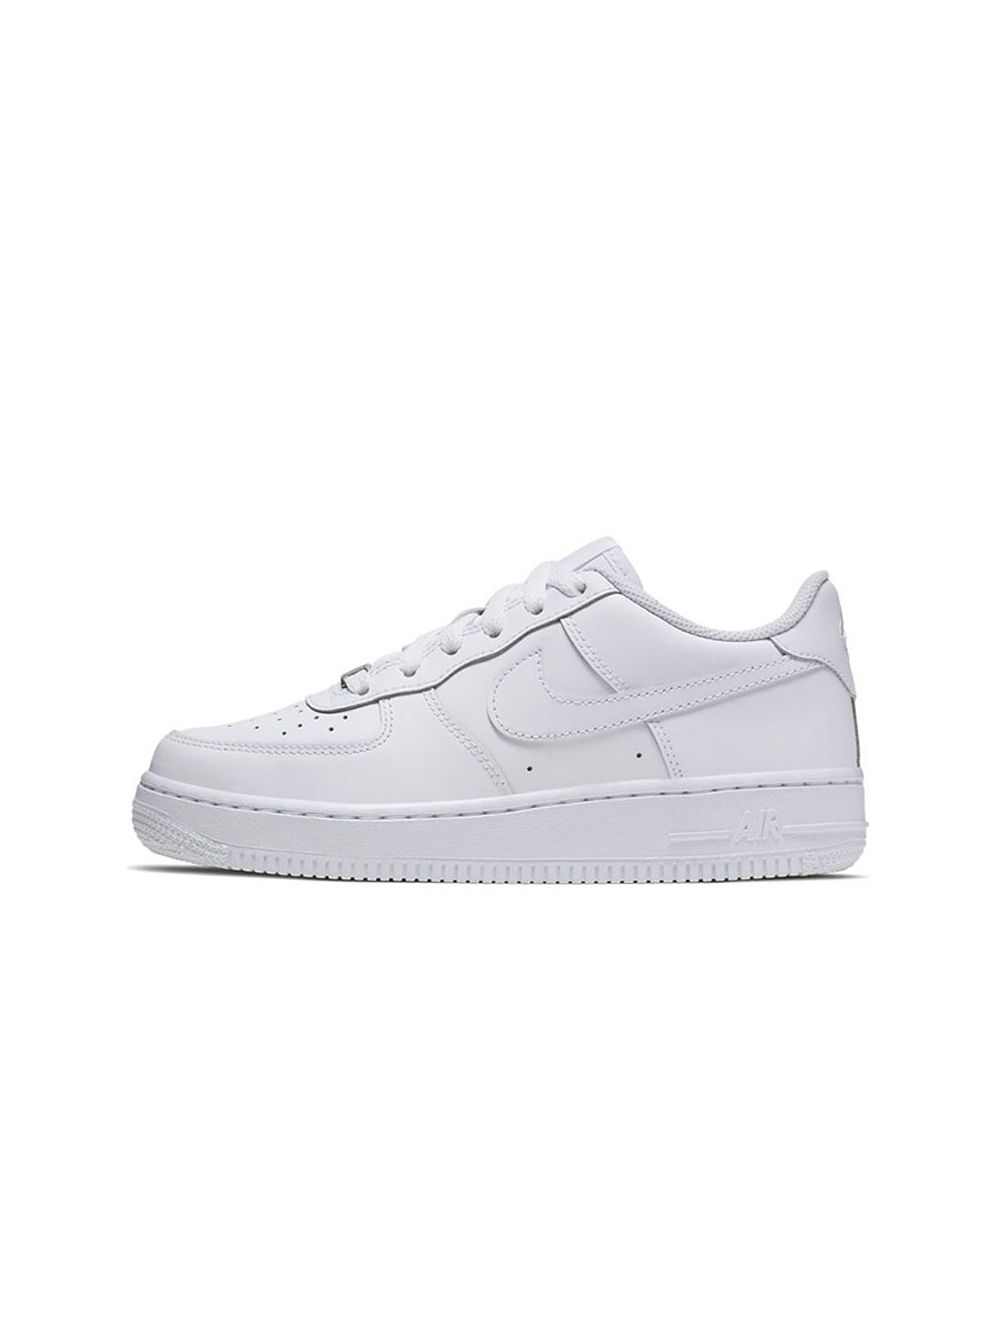 Shop Nike Air Force 1 GS Youth Shoe White